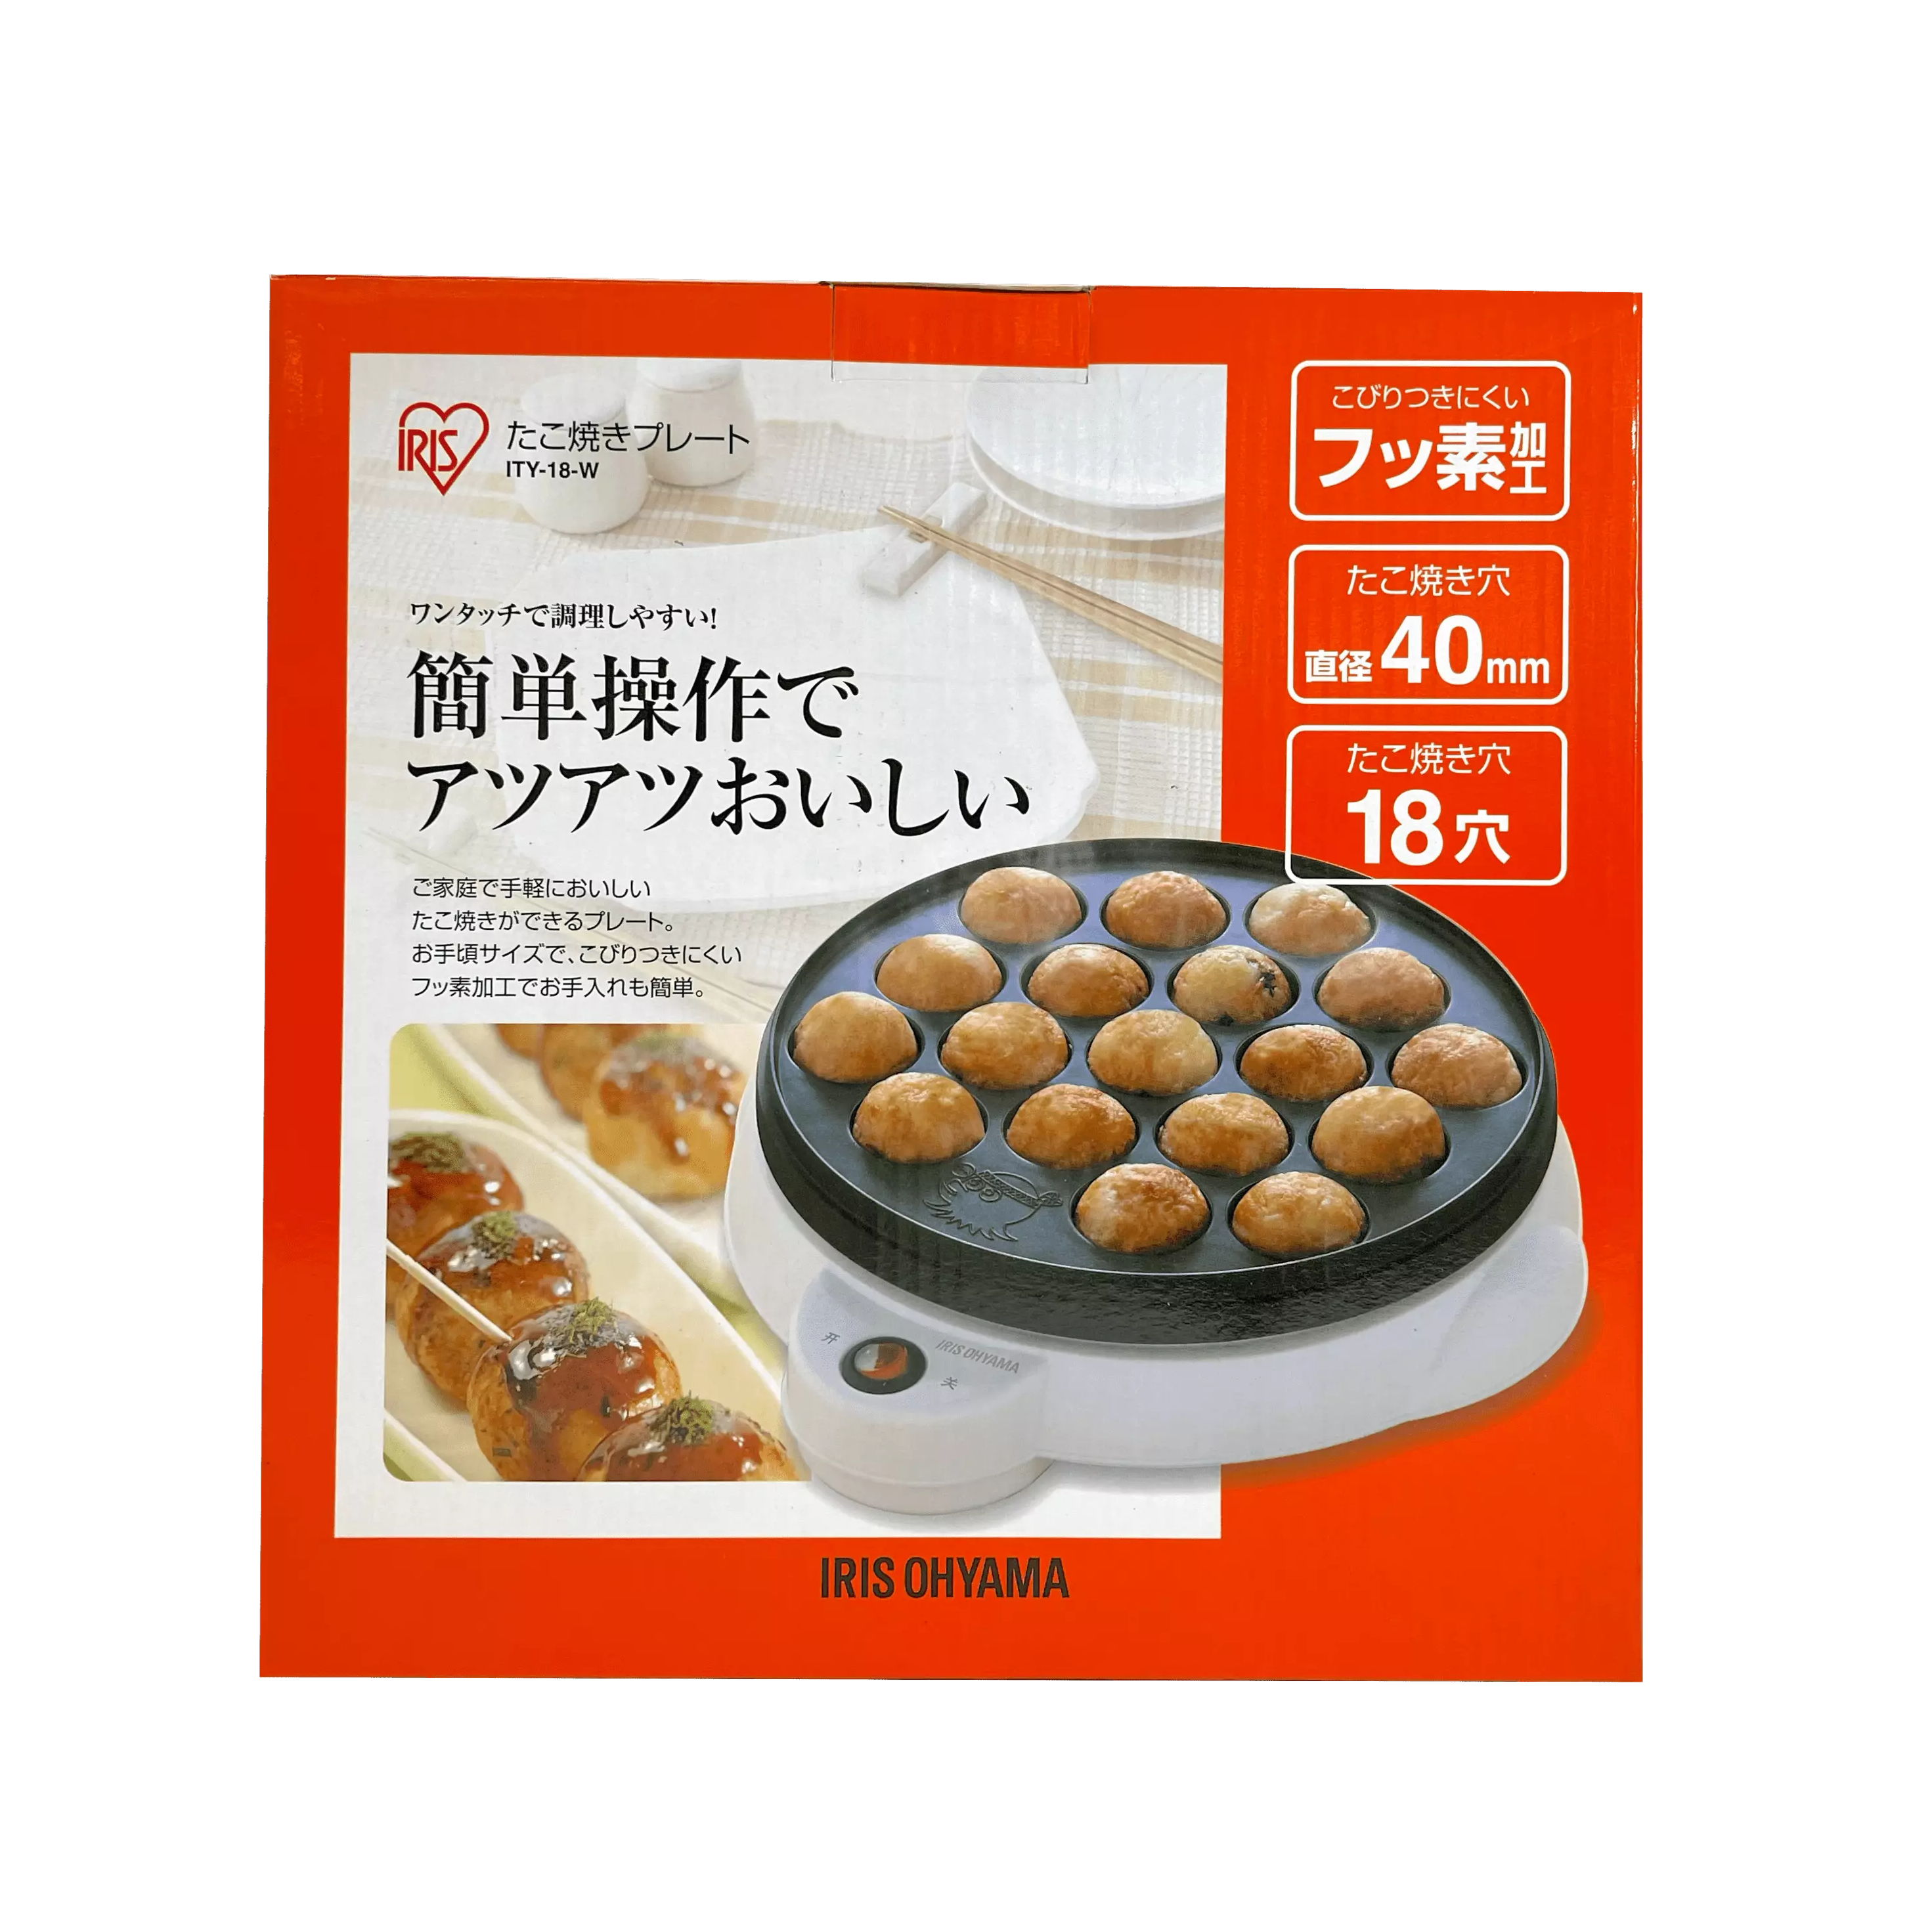 Wire baking sheet Suitable for Pan-fried Japanese Takoyaki & Small Cakes B:40cm, 600W